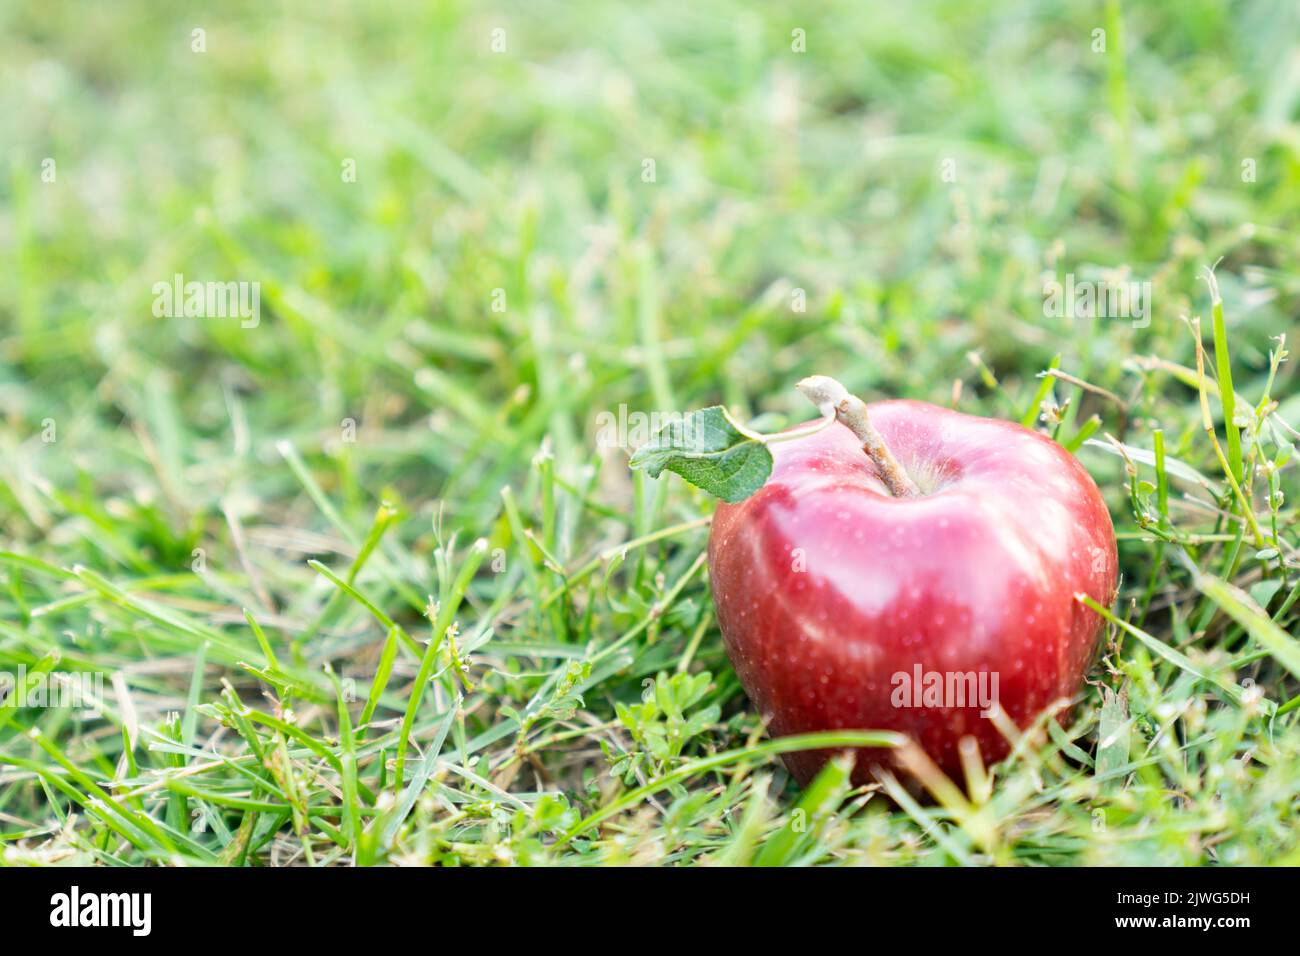 Red ripe apple on the ground in an orchard, garden Stock Photo